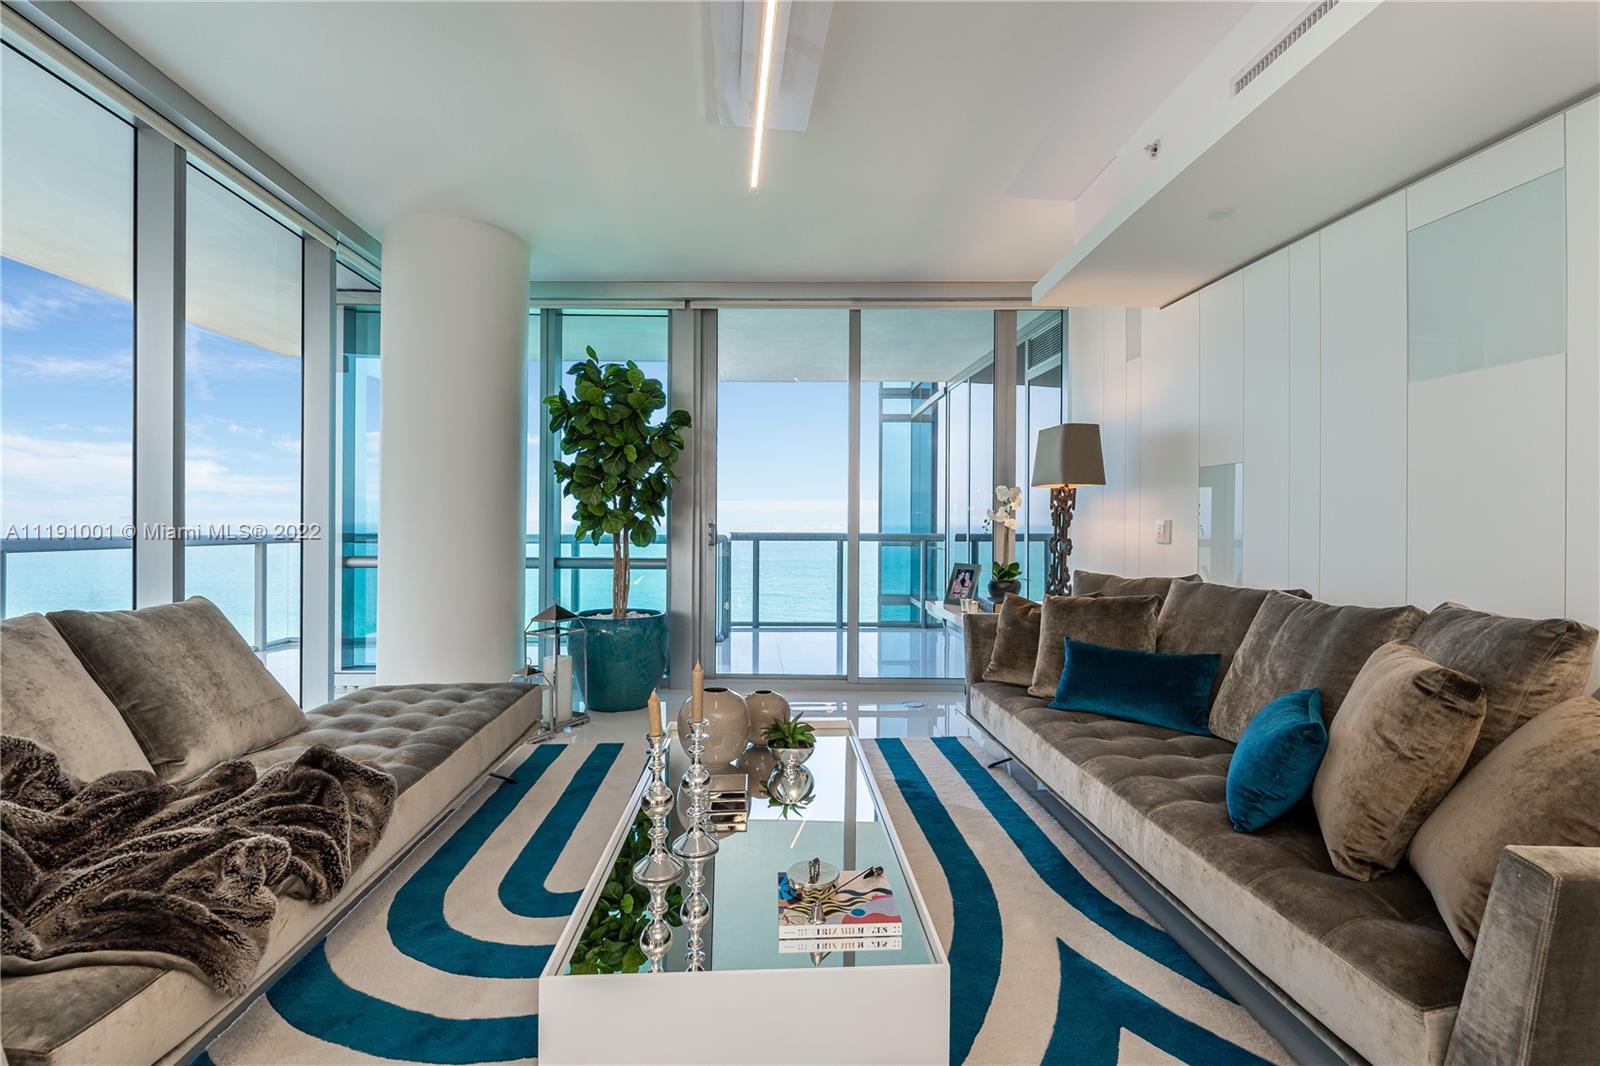 Spectacular fully furnished oceanfront residence at Jade Ocean. Professionally decorated 3 beds/3.5 baths corner unit with Artefacto, Adler and Italian furniture, white quartz flooring, Miele appliances, wraparound balcony and private elevator entrance.